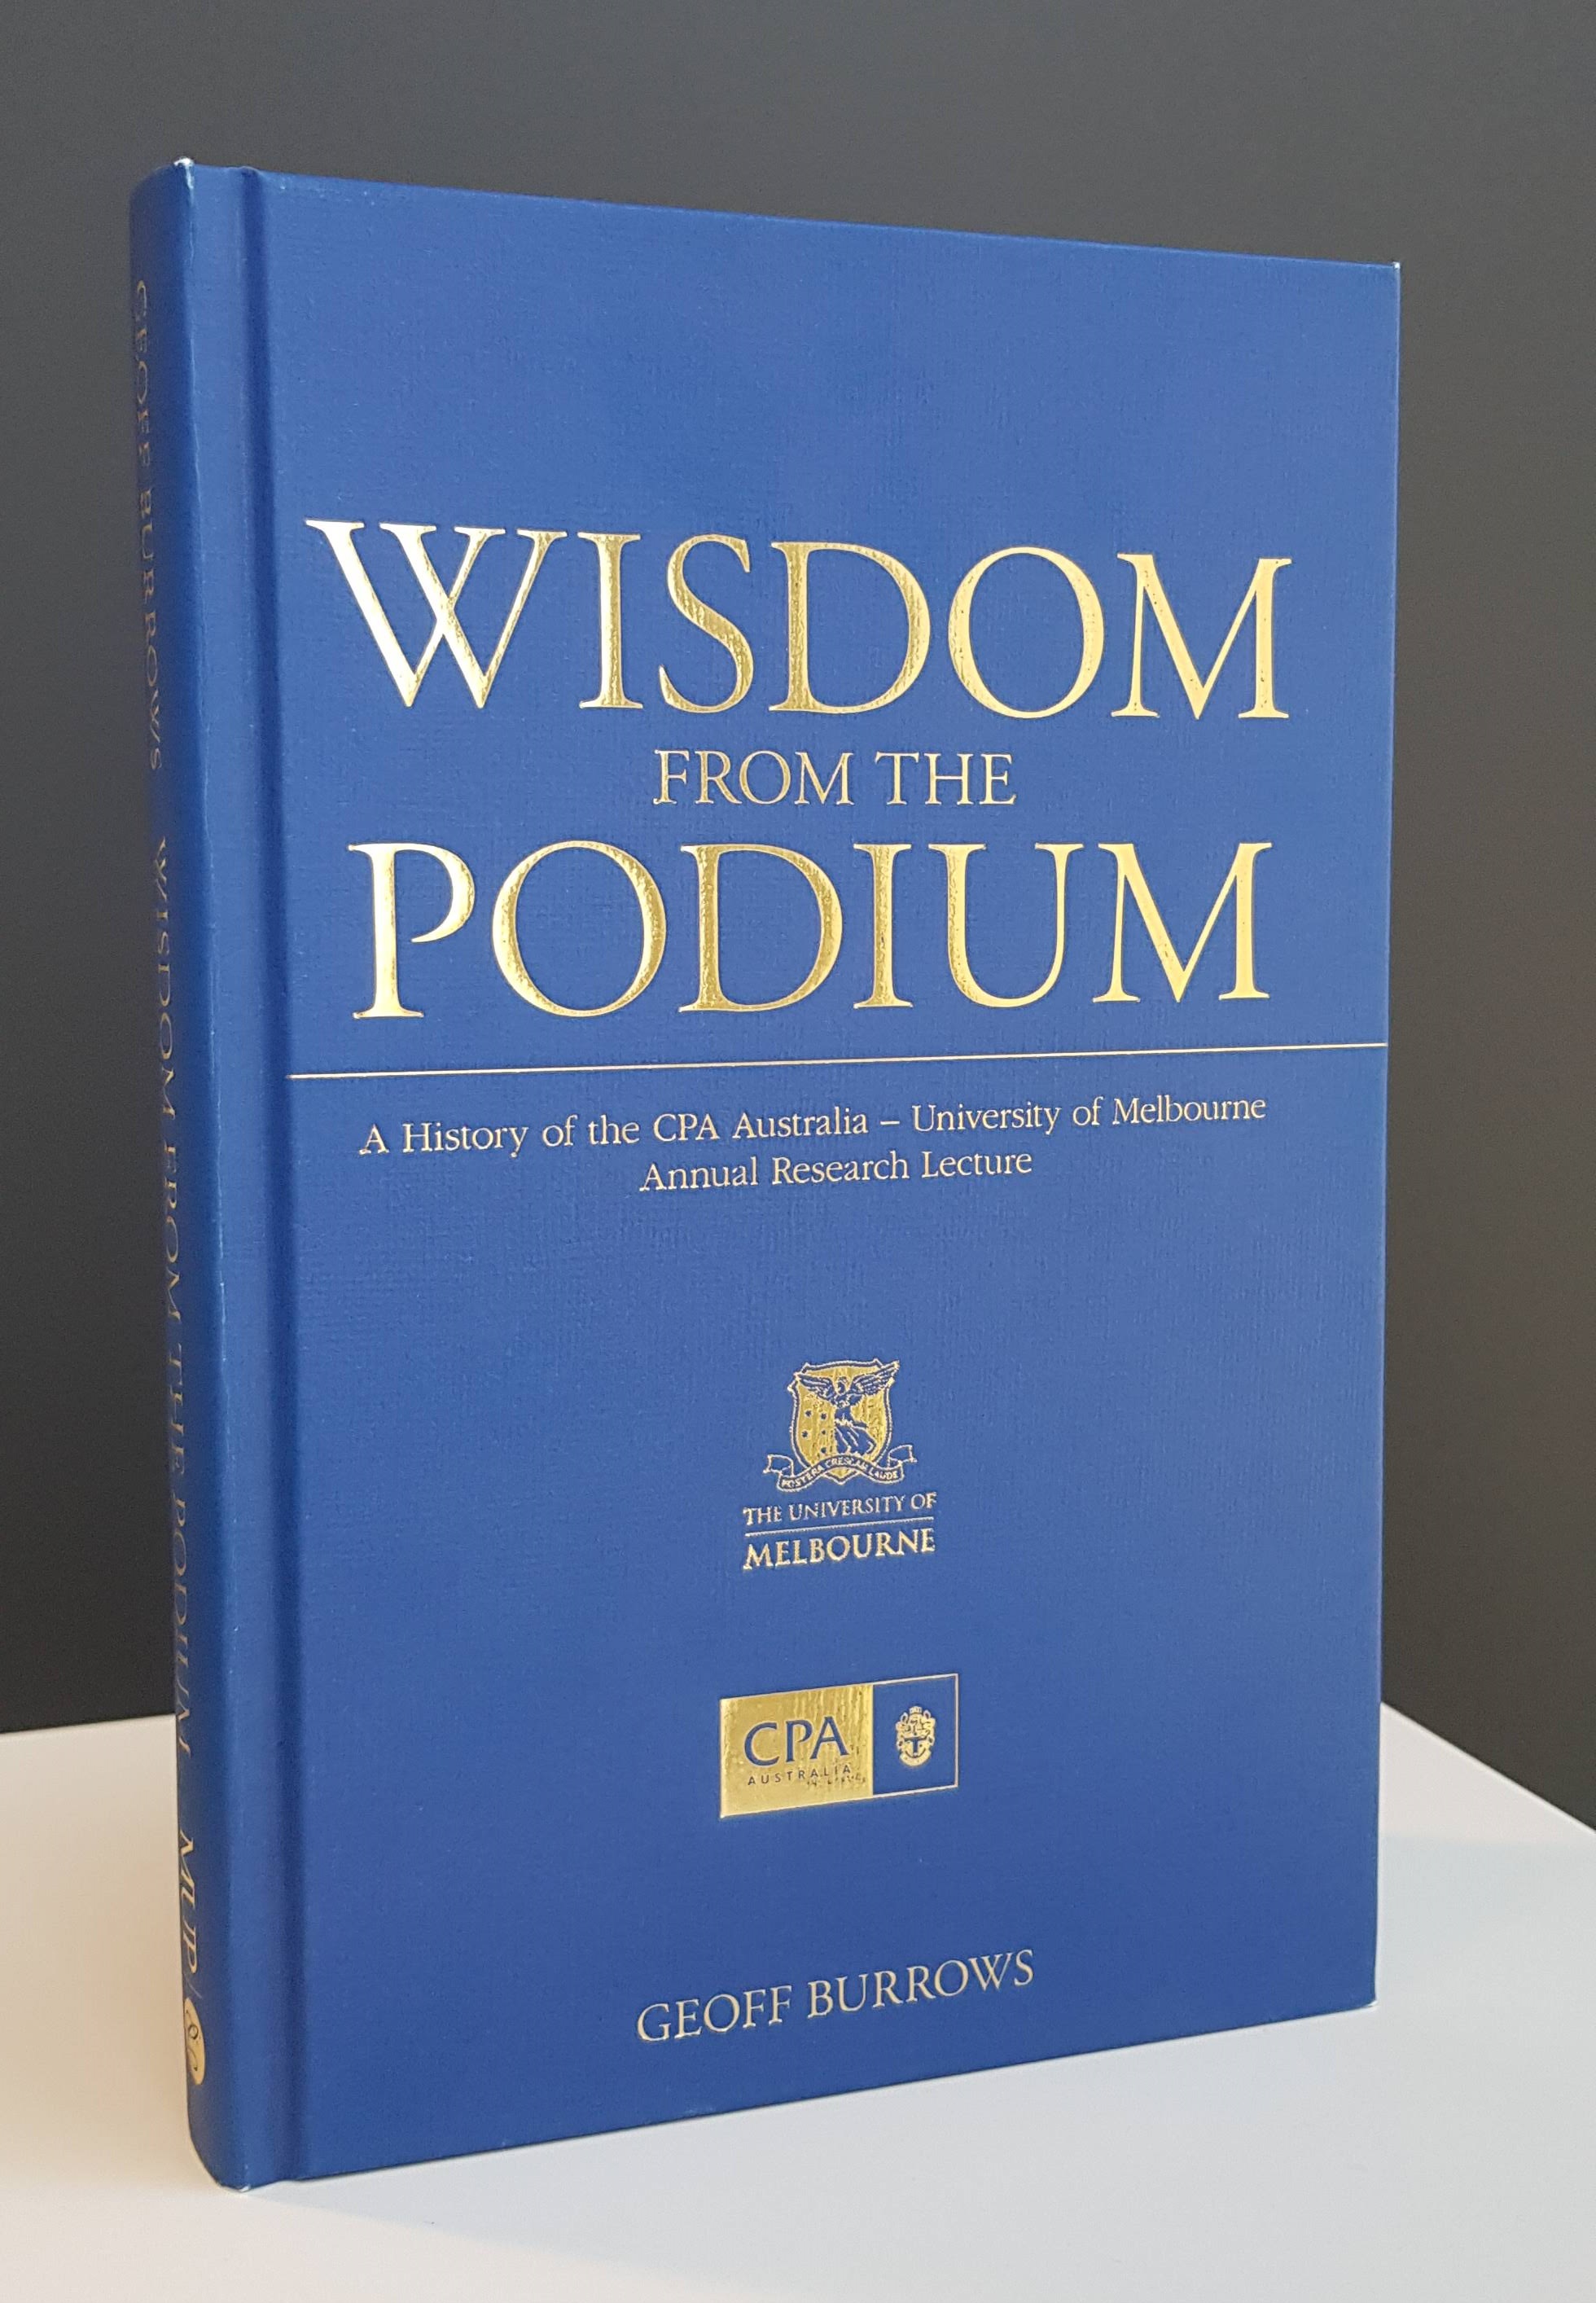 Wisdom from the Podium by Geoff Burrows